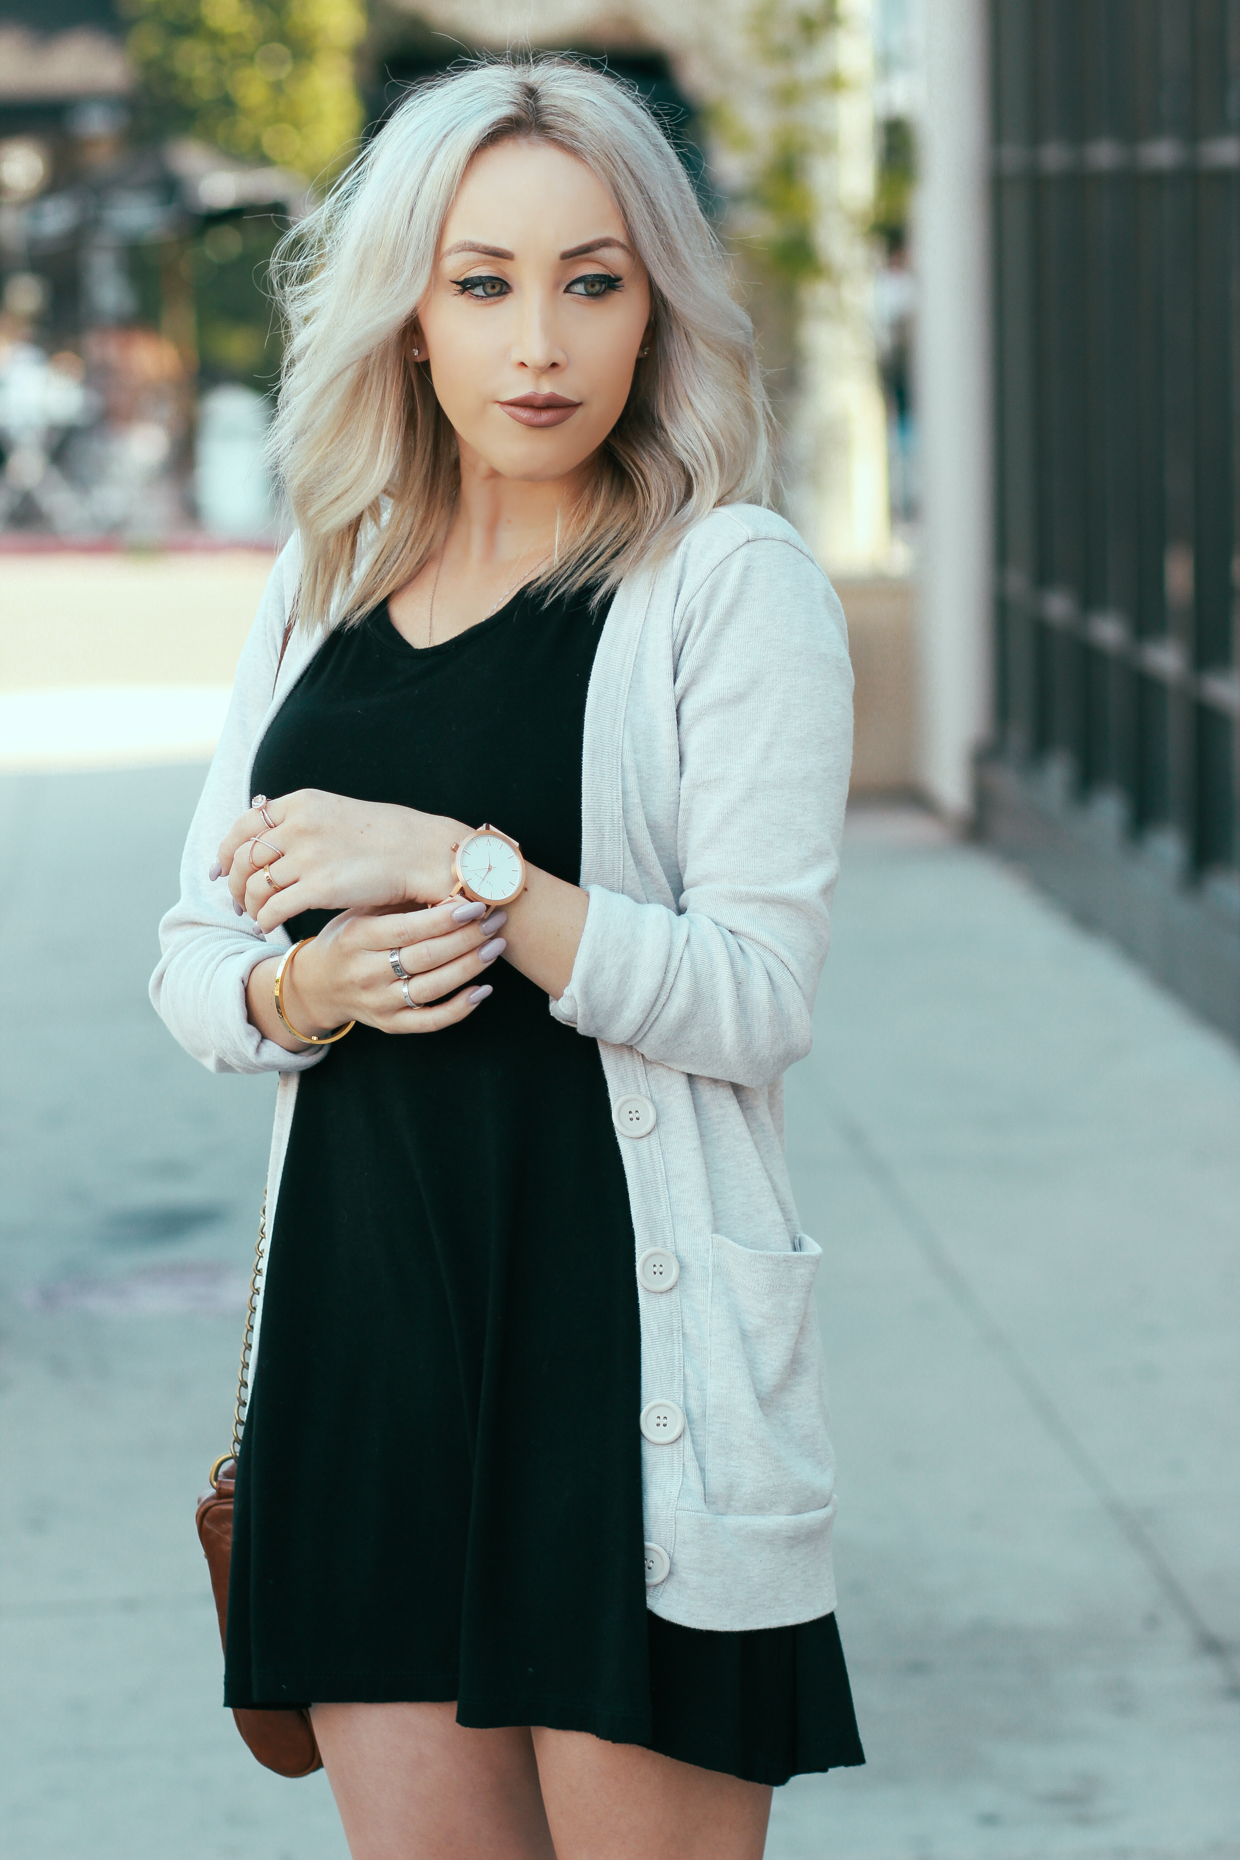 Blondie in the City | Little Black Dress and a Light Sweater | Watch: @the_fifth 